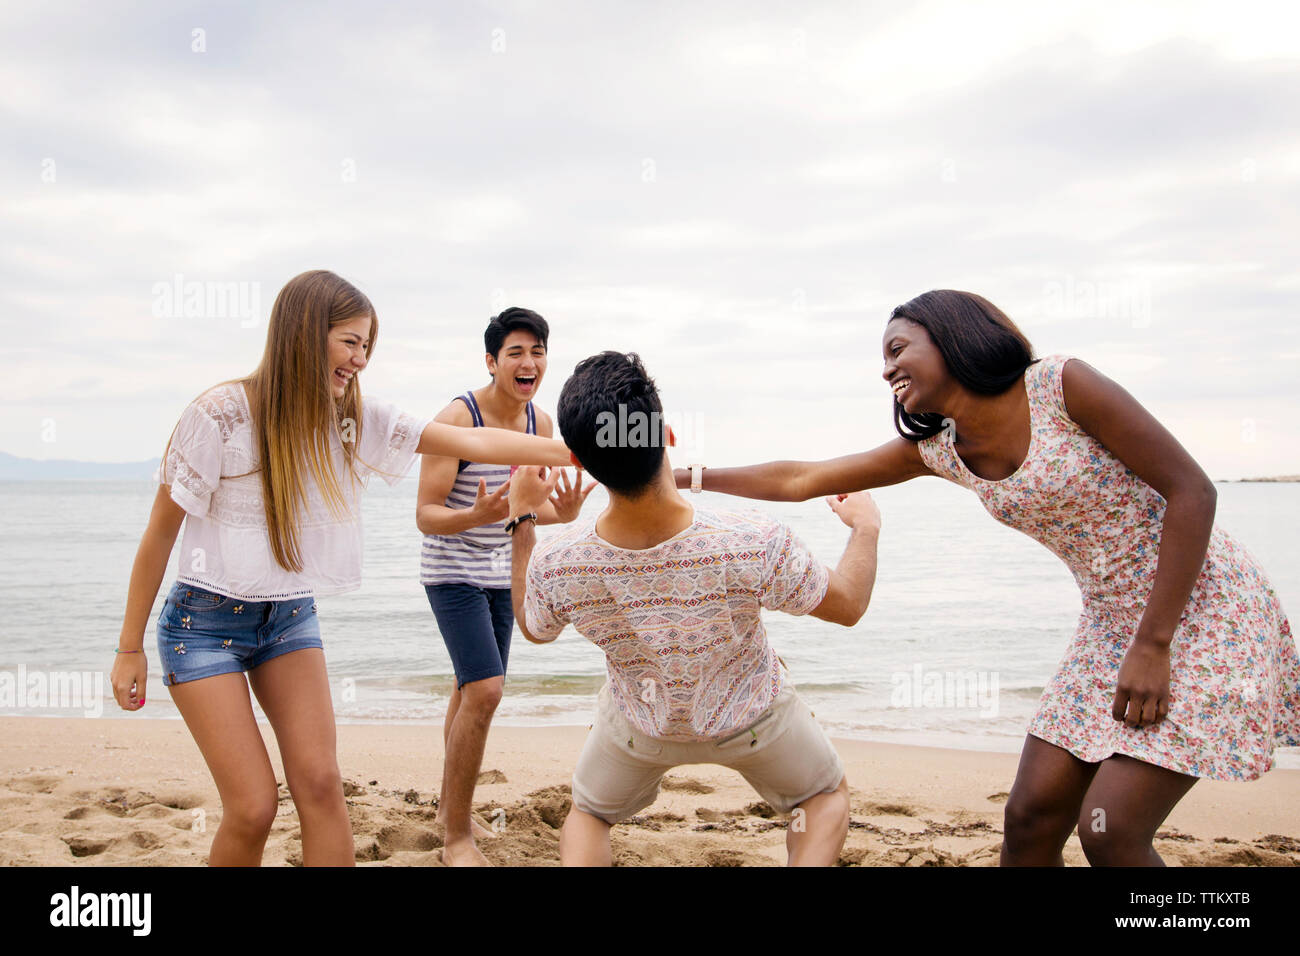 Man passing under women's arms while playing on beach against sky Stock Photo